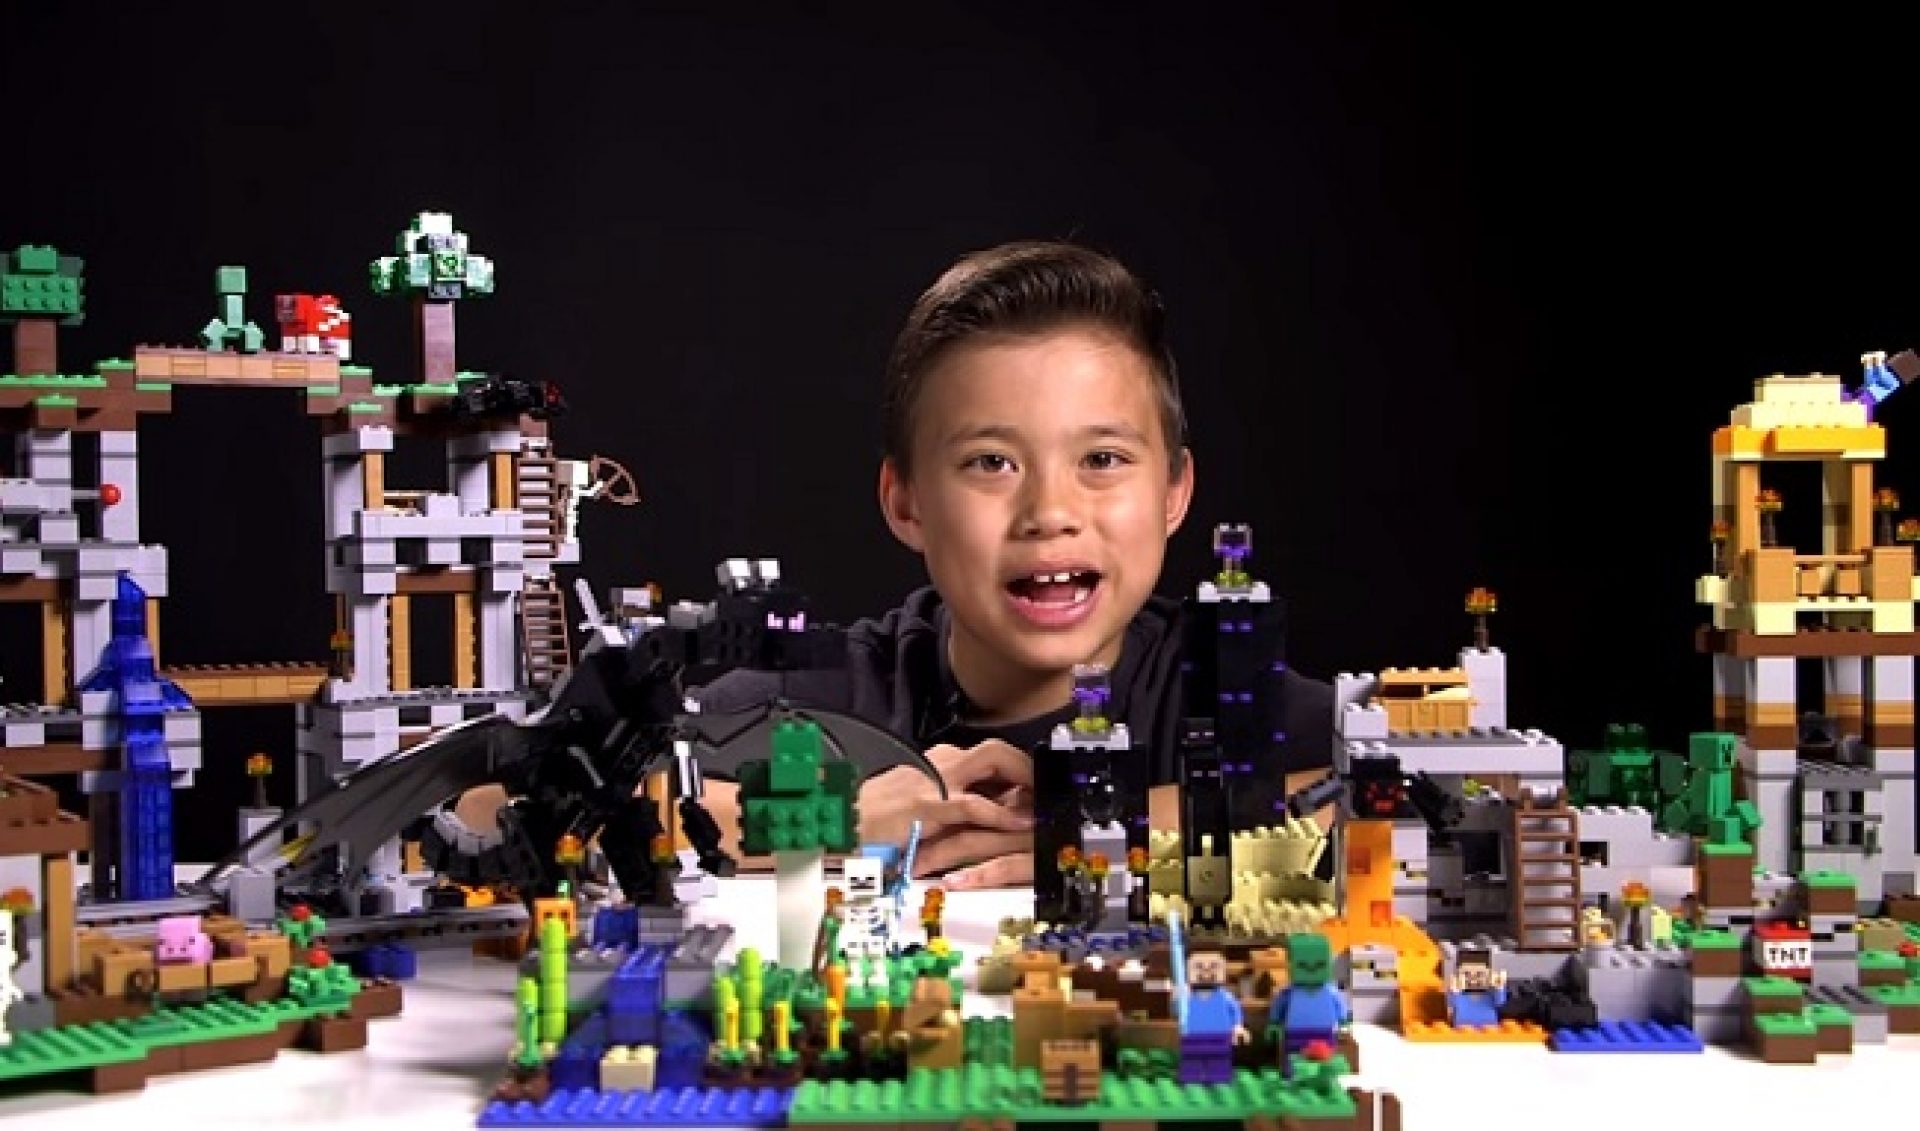 Toy Manufacturers Turn To (Very) Young YouTube Reviewers For Promotion